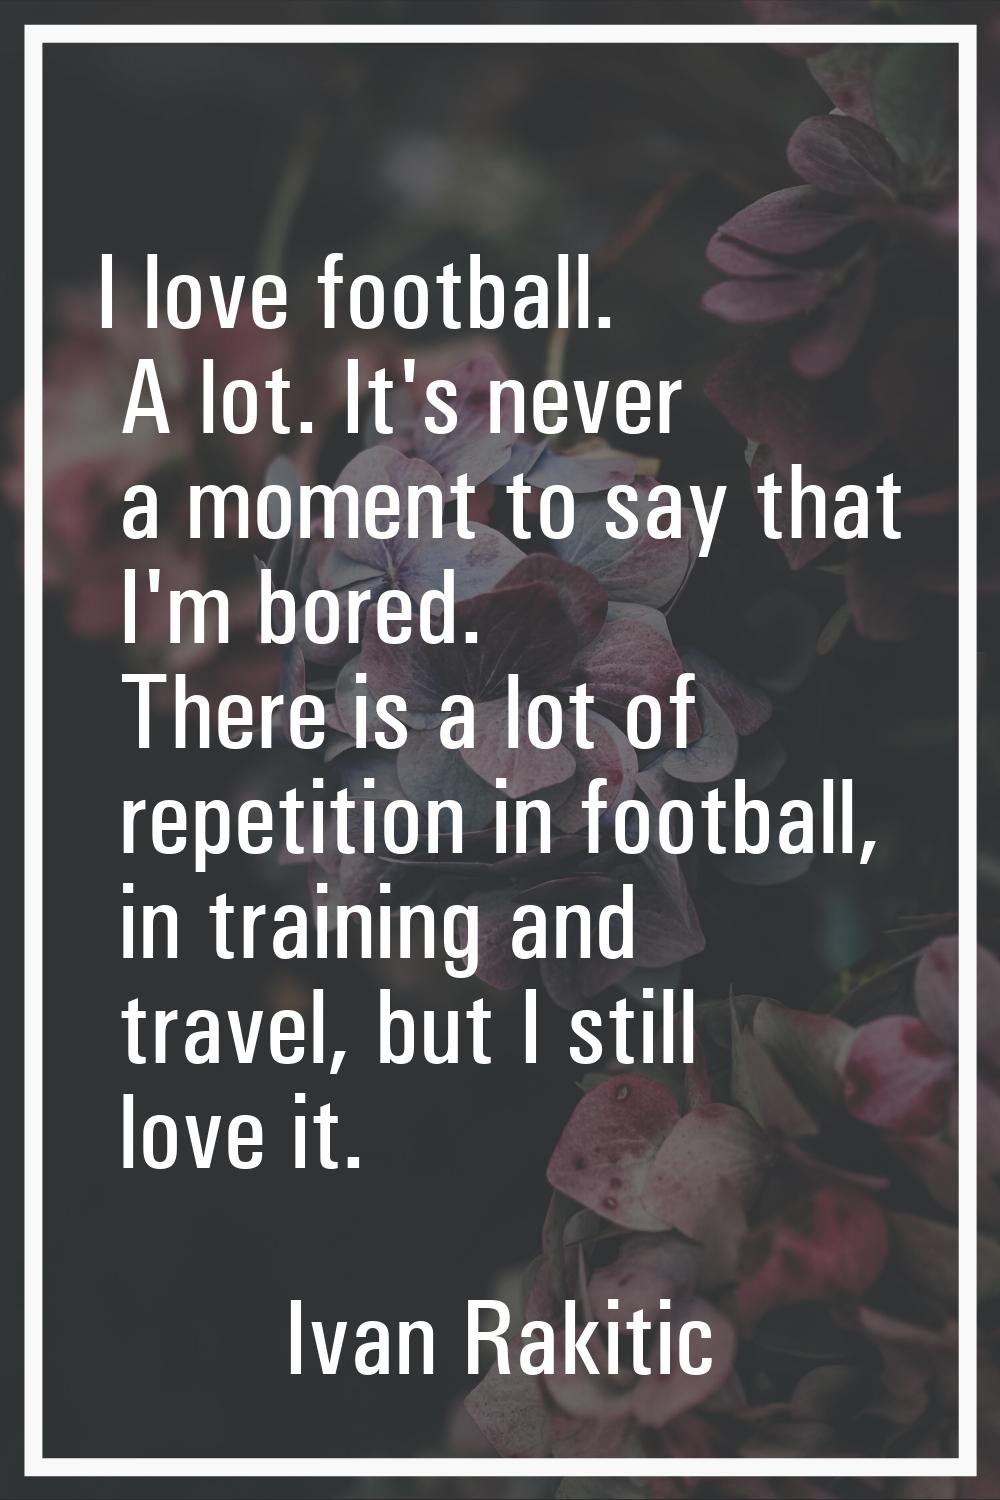 I love football. A lot. It's never a moment to say that I'm bored. There is a lot of repetition in 